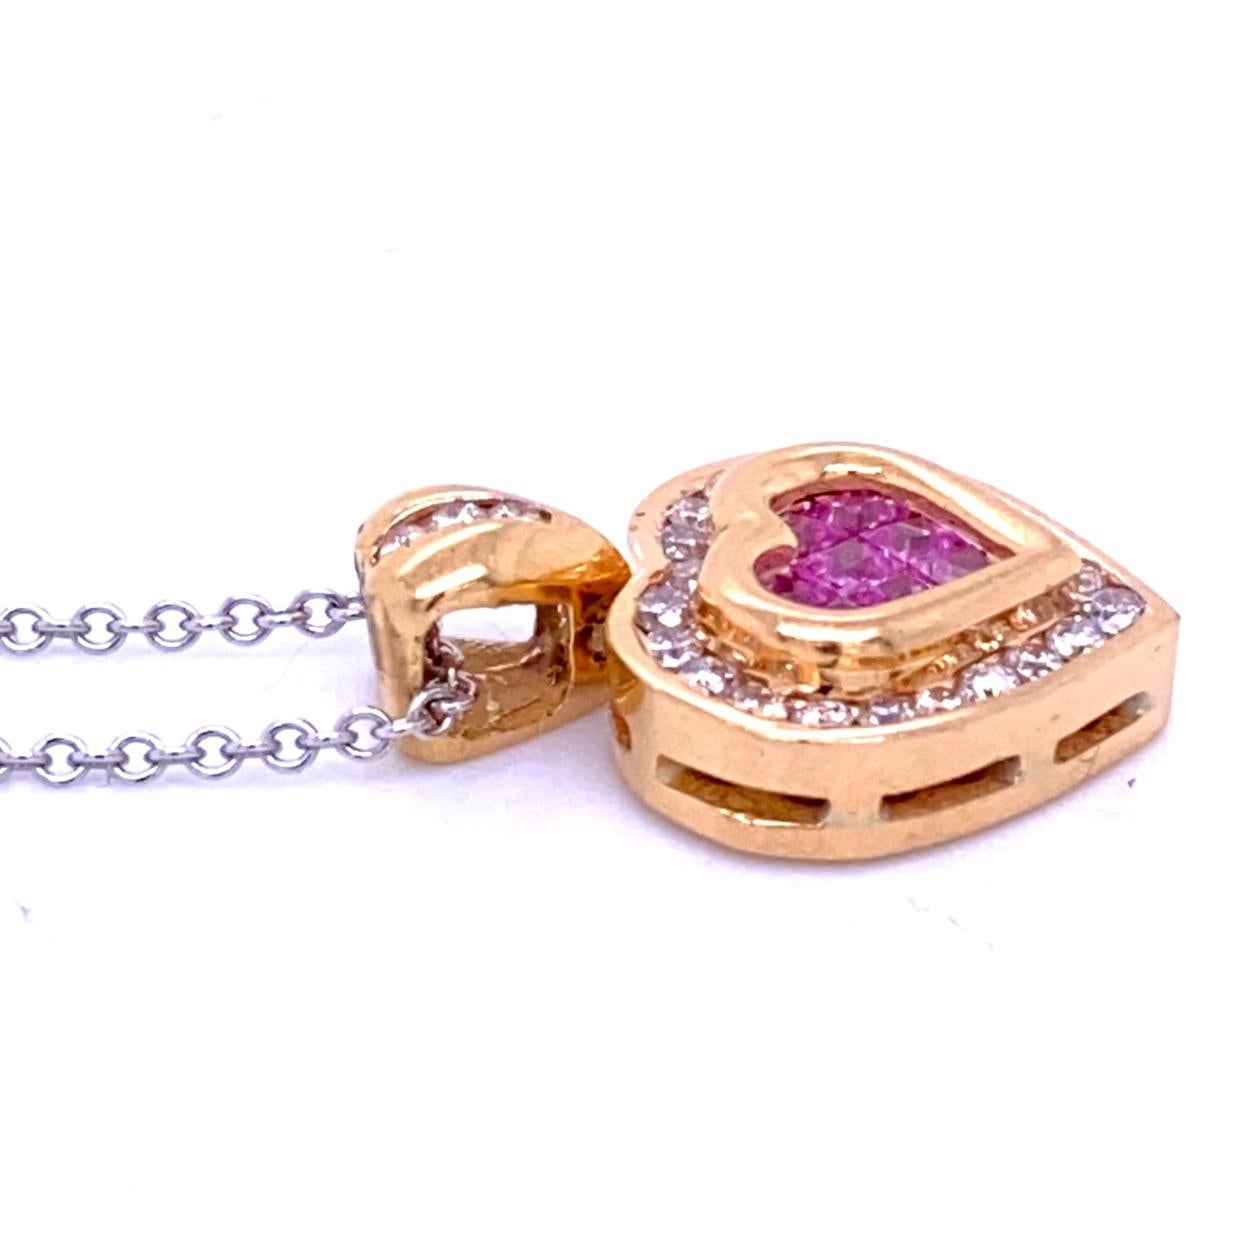 0.41 Carat Diamond/0.41 Carat Pink Sapphire 18K Gold Hearts Pendant Necklace In New Condition For Sale In Los Angeles, CA